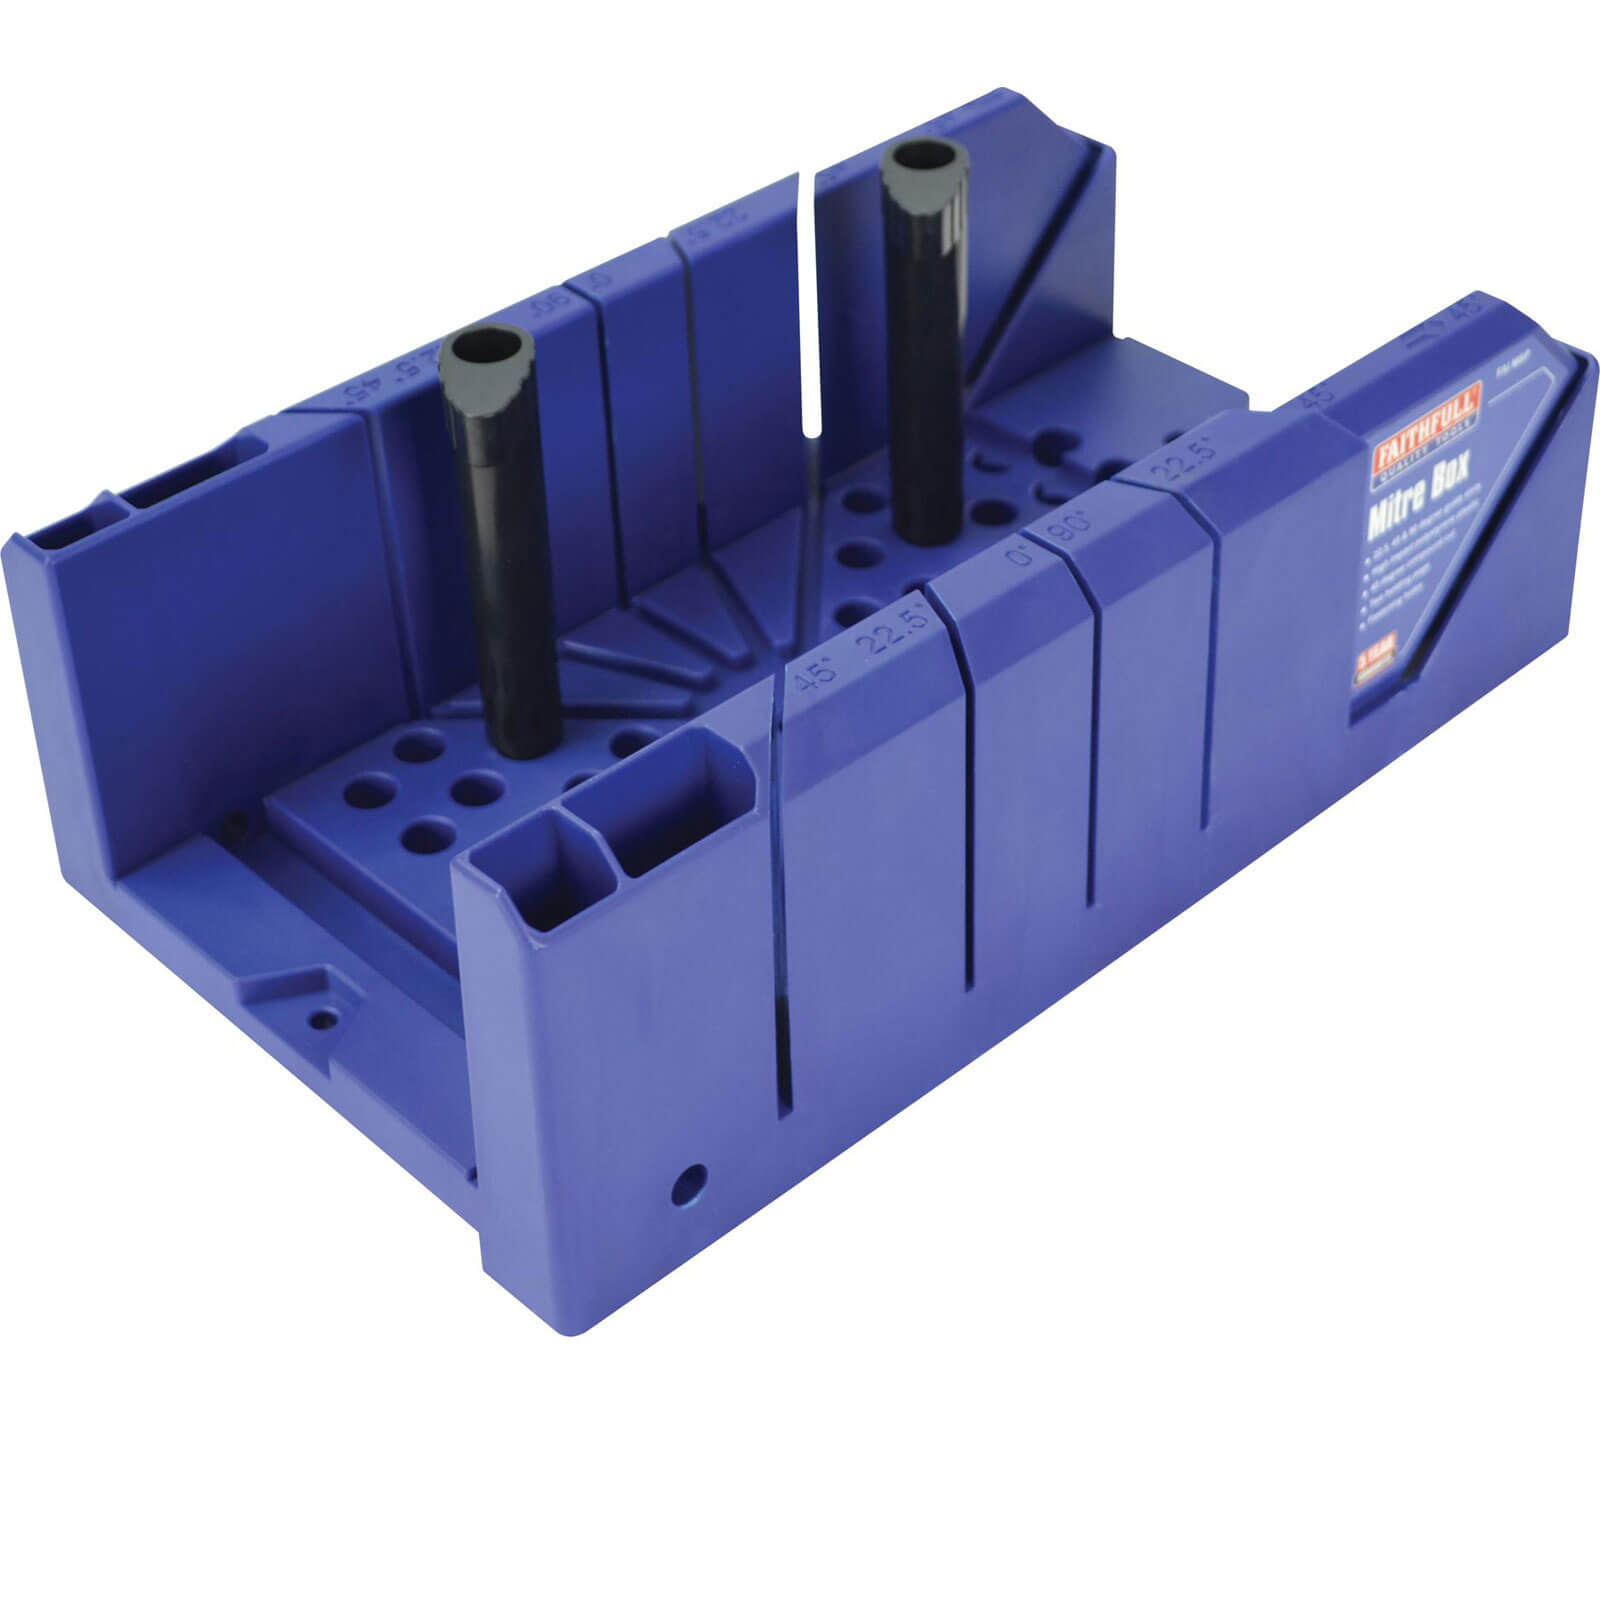 Image of Faithfull Plastic Mitre Box and Clamping Pegs